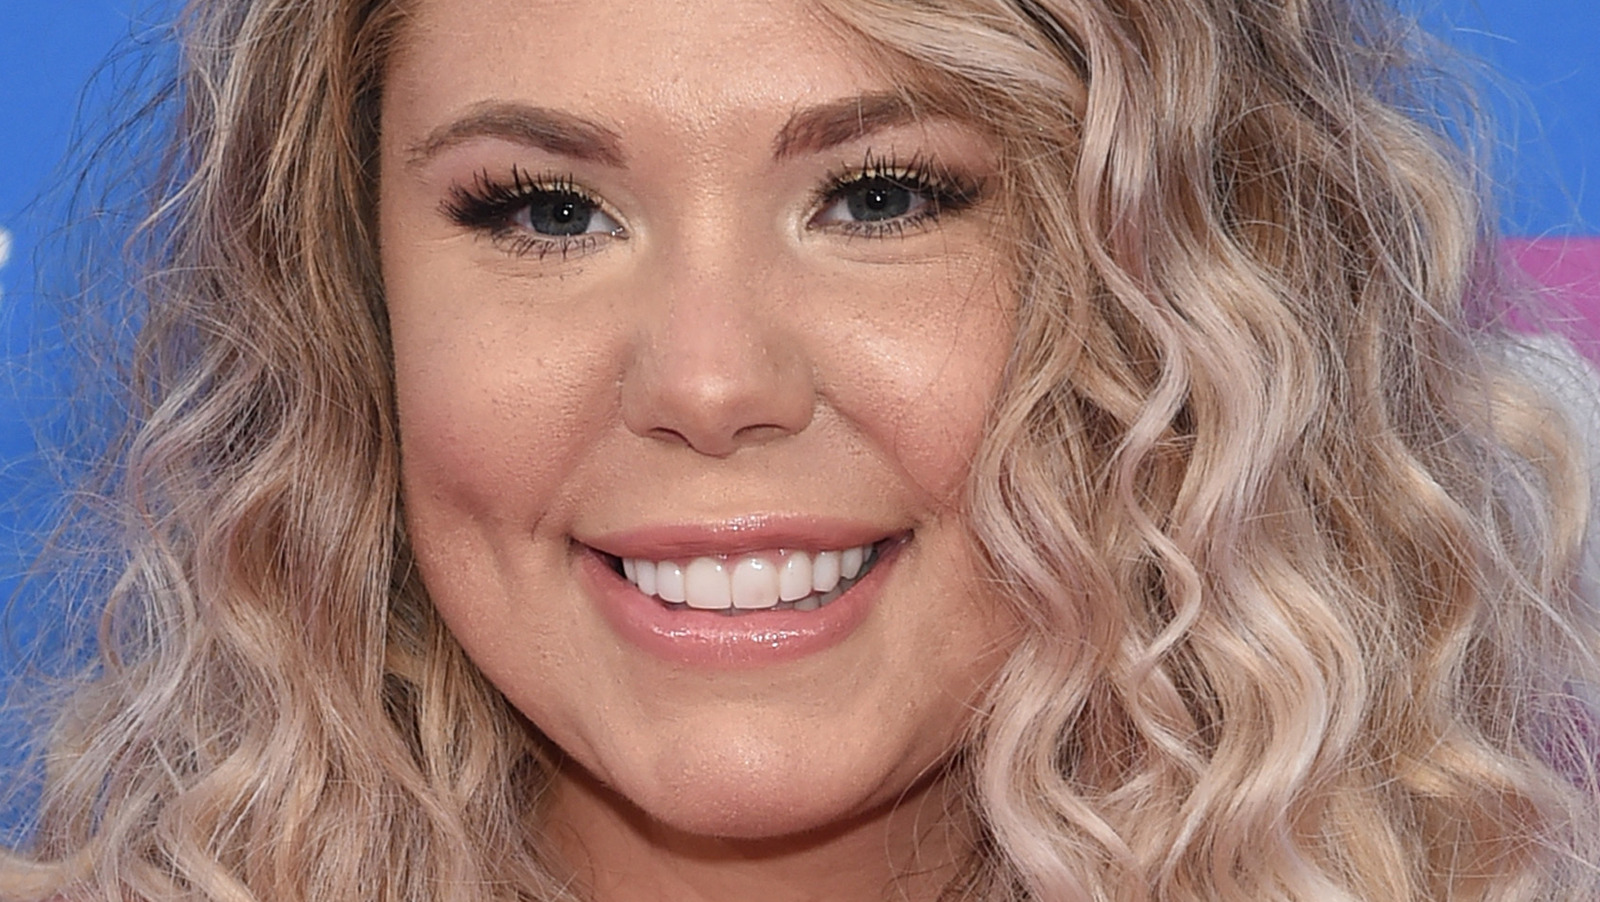 The Complicated Relationship Teen Mom’s Kailyn Lowry Has With Her Parents